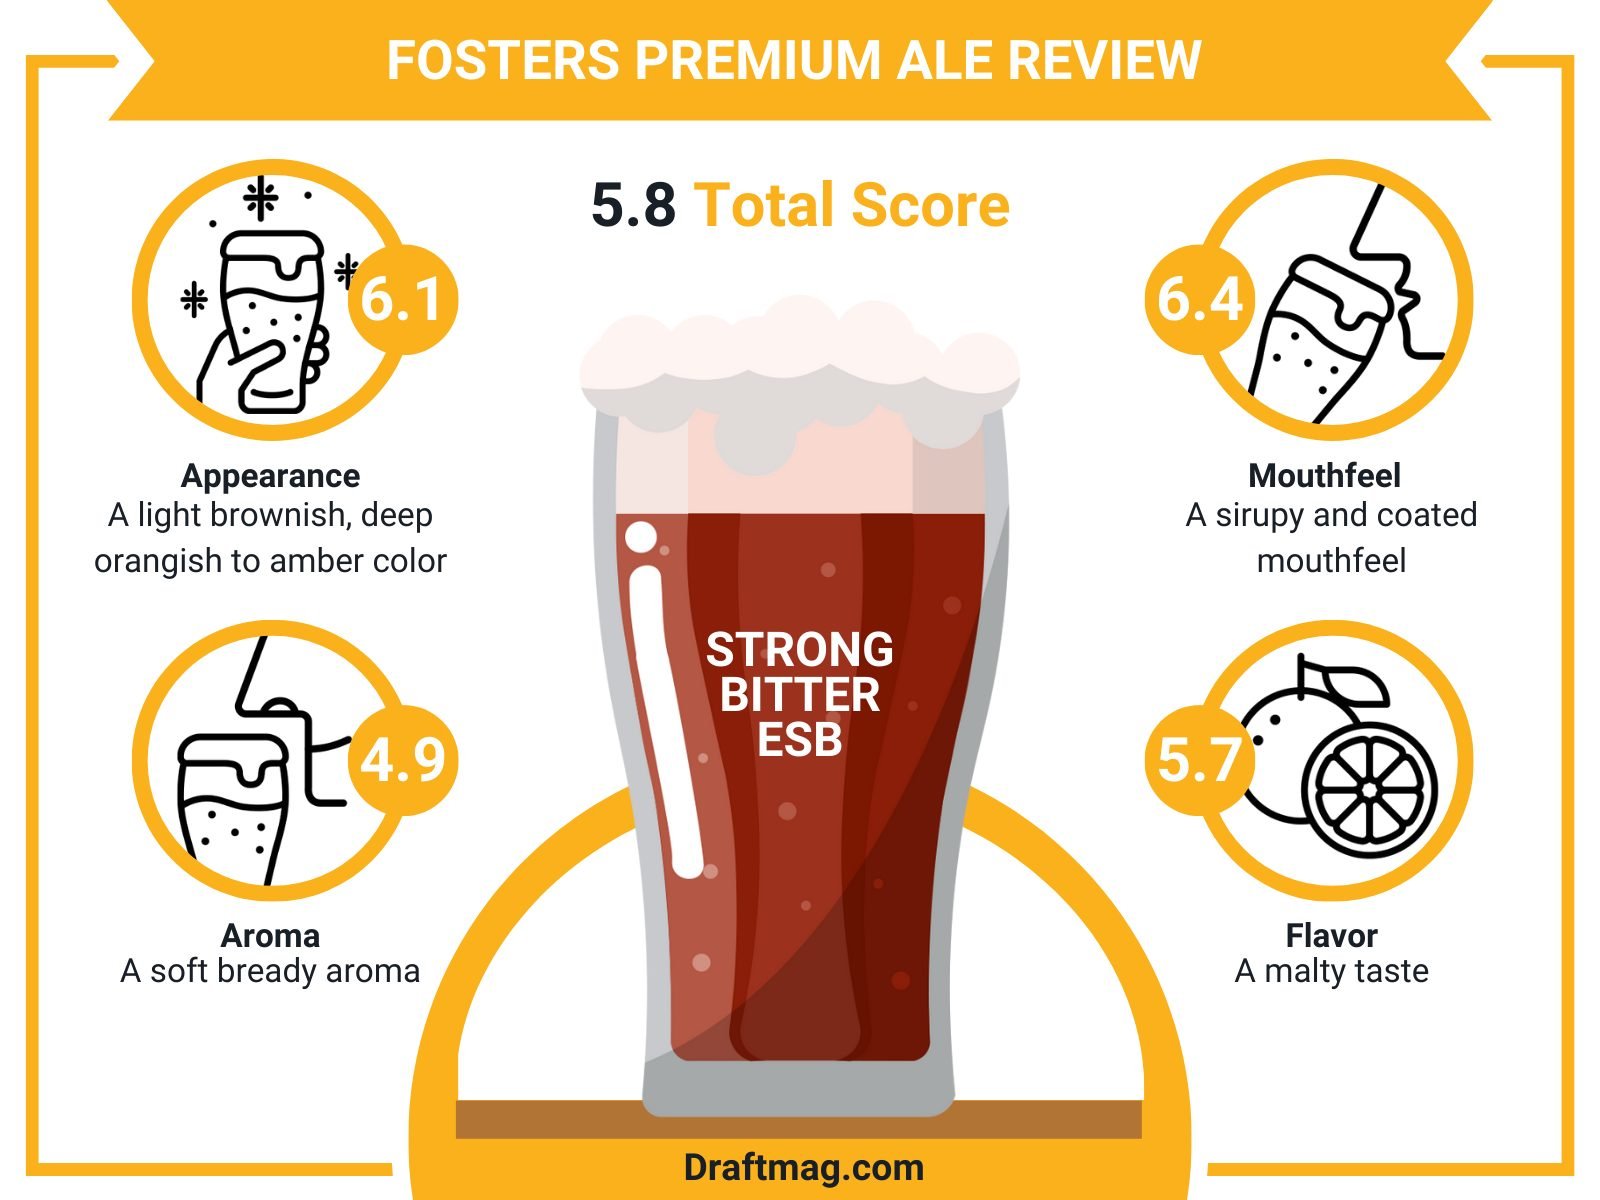 Fosters Premium Review Infographic